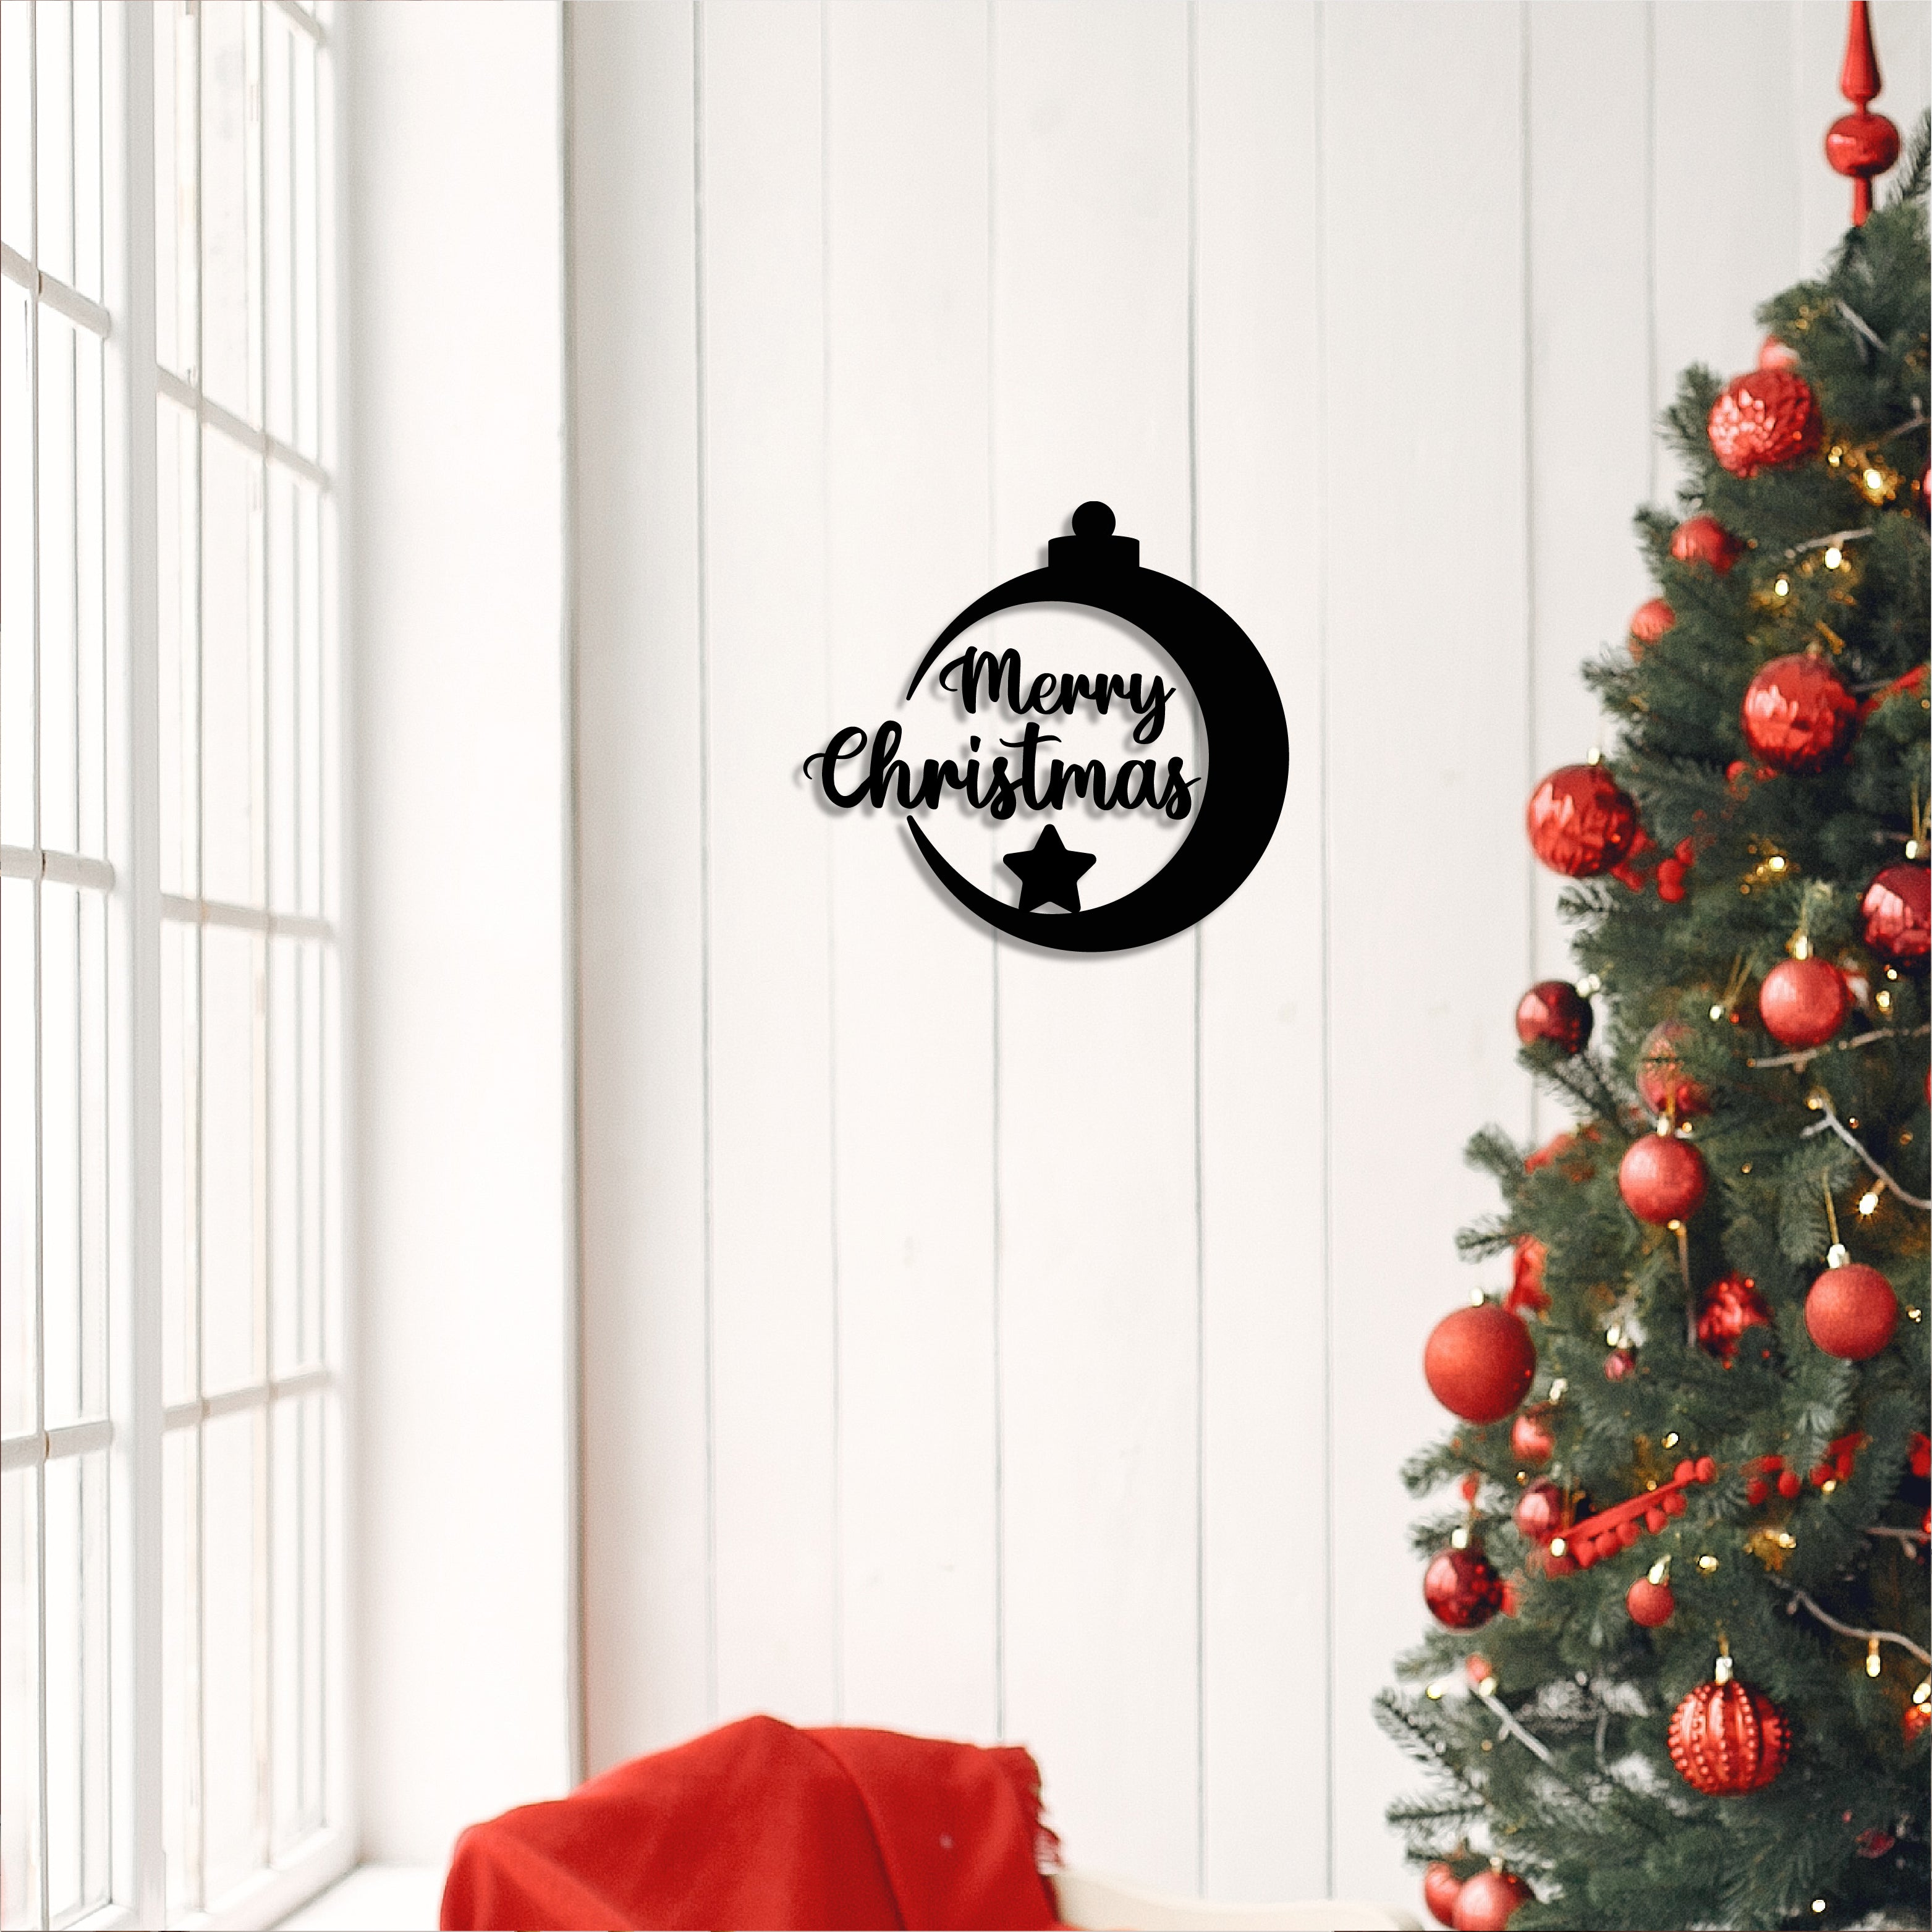 "Merry Christmas Bell" Black Engineered Wood Wall Art Cutout, Ready to Hang Home Decor 1